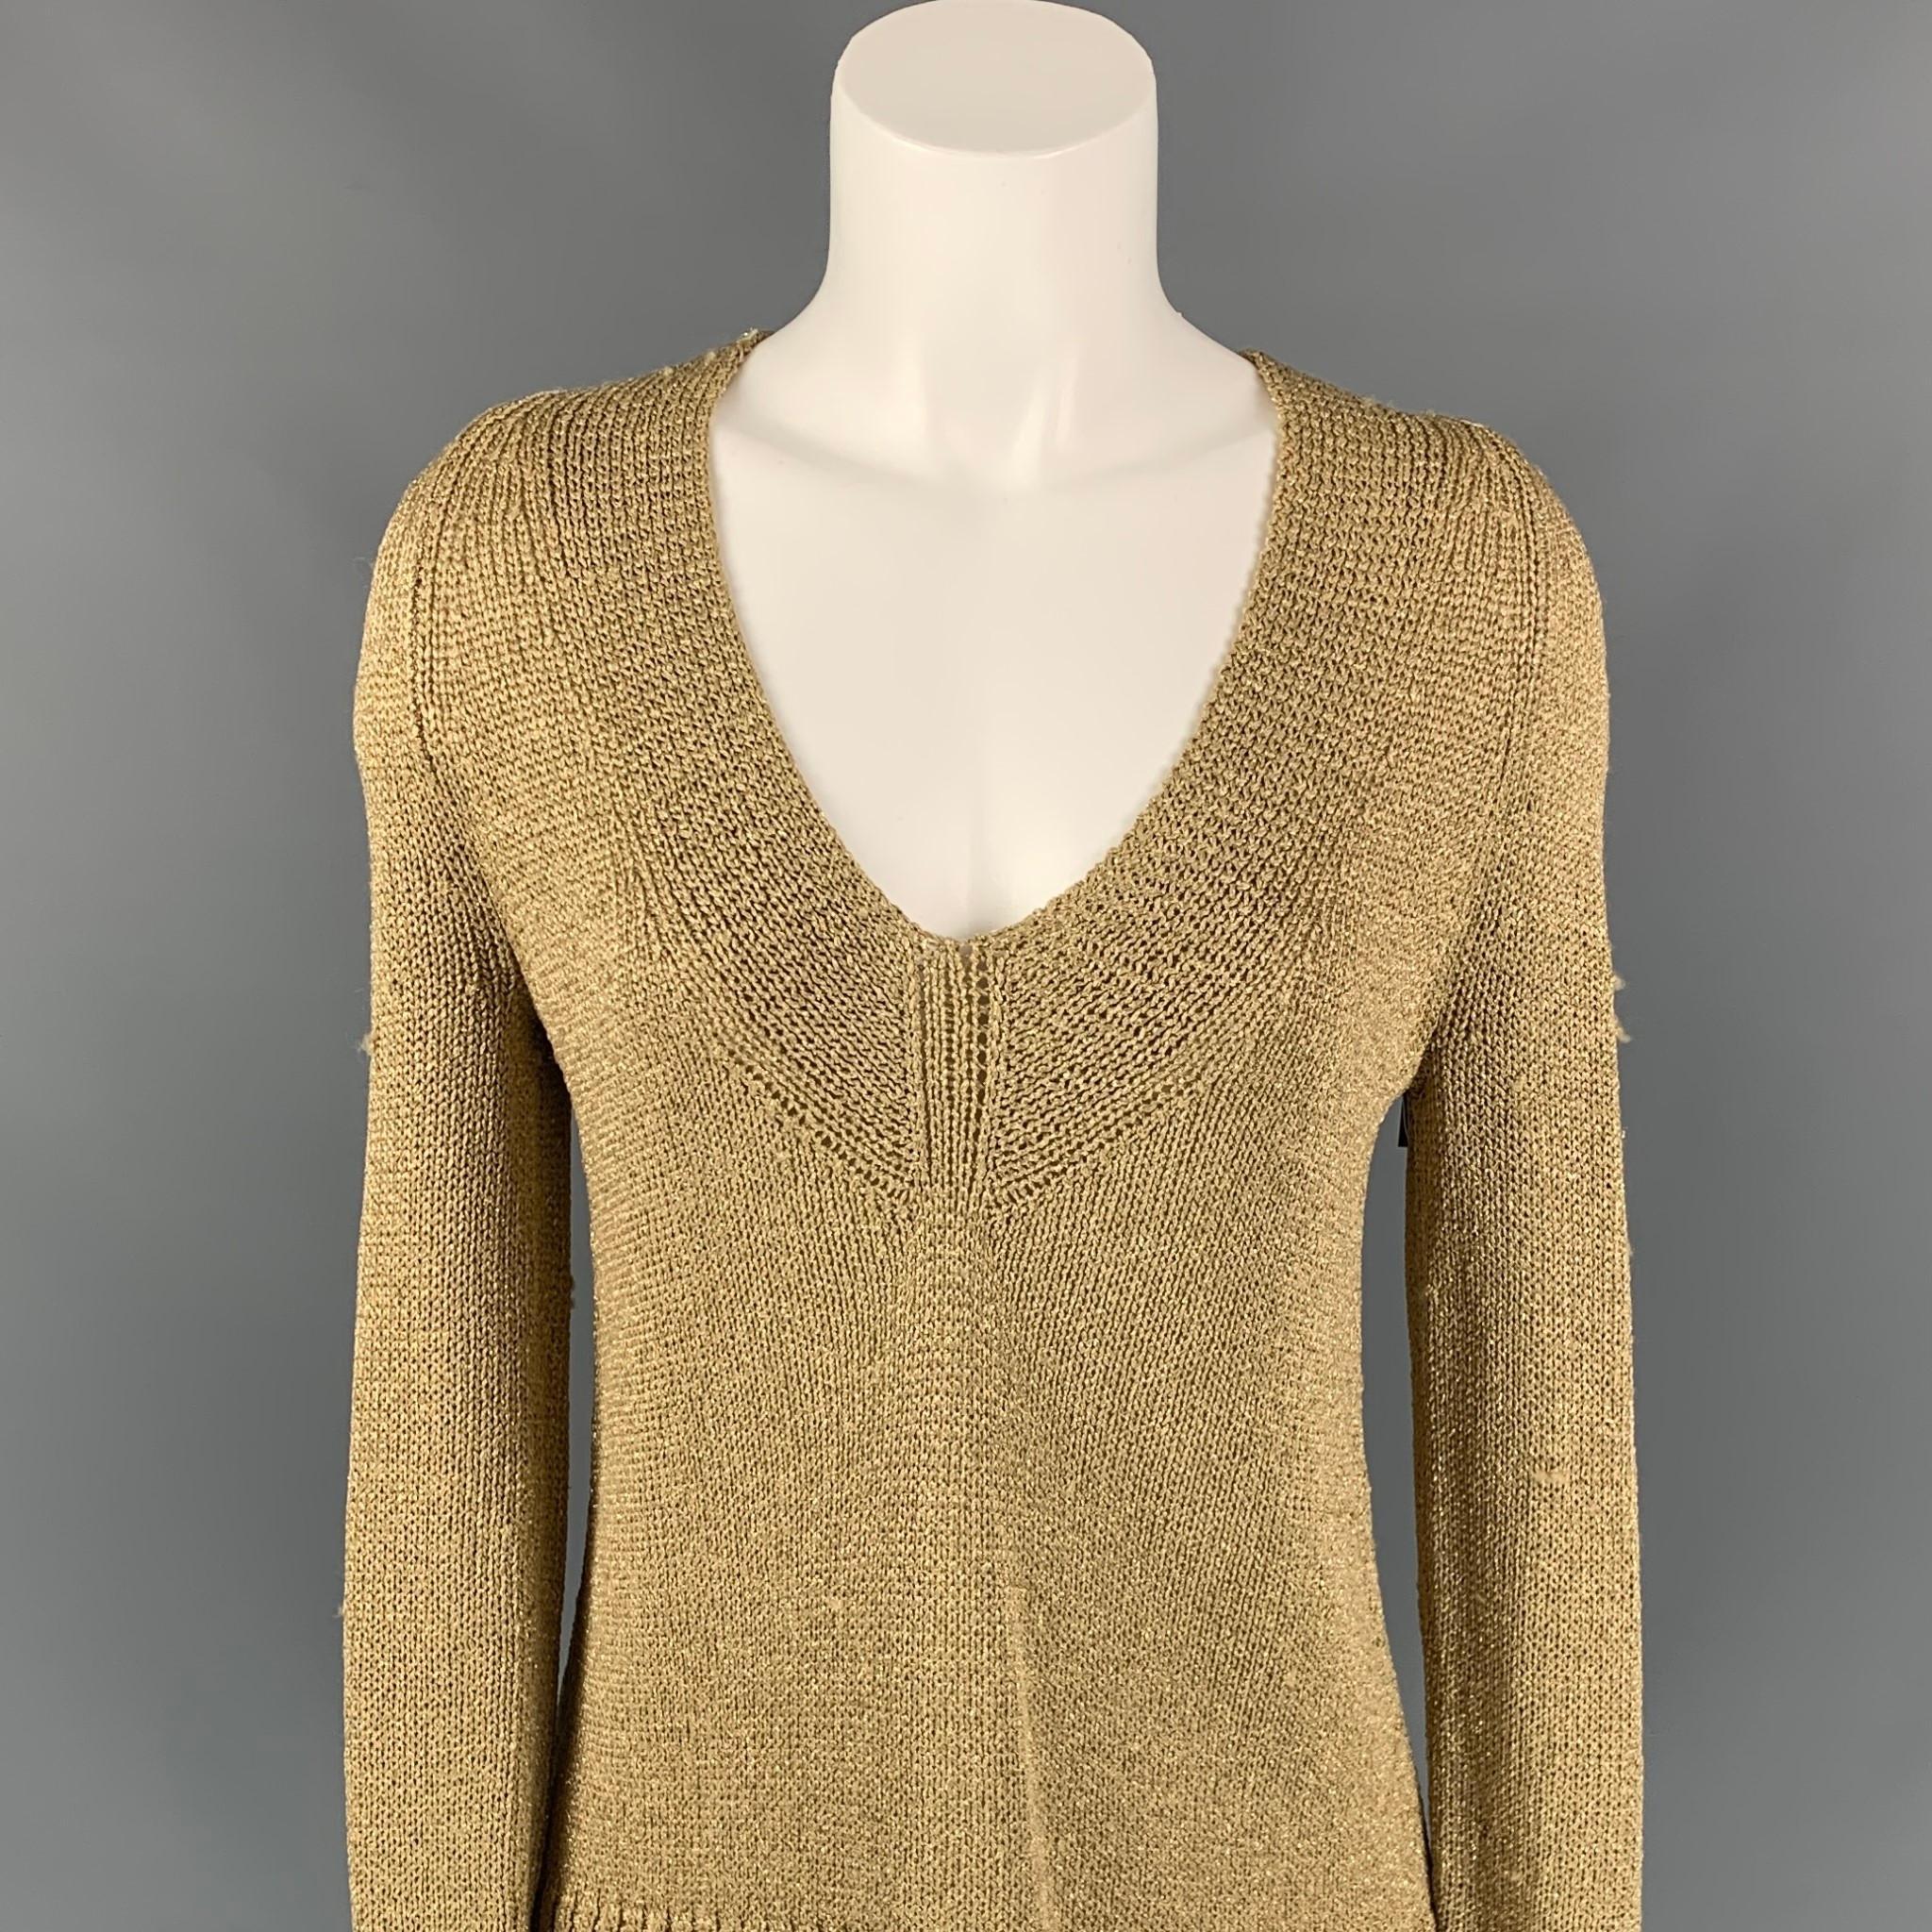 DIANE VON FURSTENBERG pullover comes in a gold knitted acetate blend featuring long sleeves and a deep v-neck. 

New With Tags. 
Marked: P

Measurements:

Shoulder: 17 in.
Bust: 34 in.
Sleeve: 25.5 in.
Length: 27 in. 